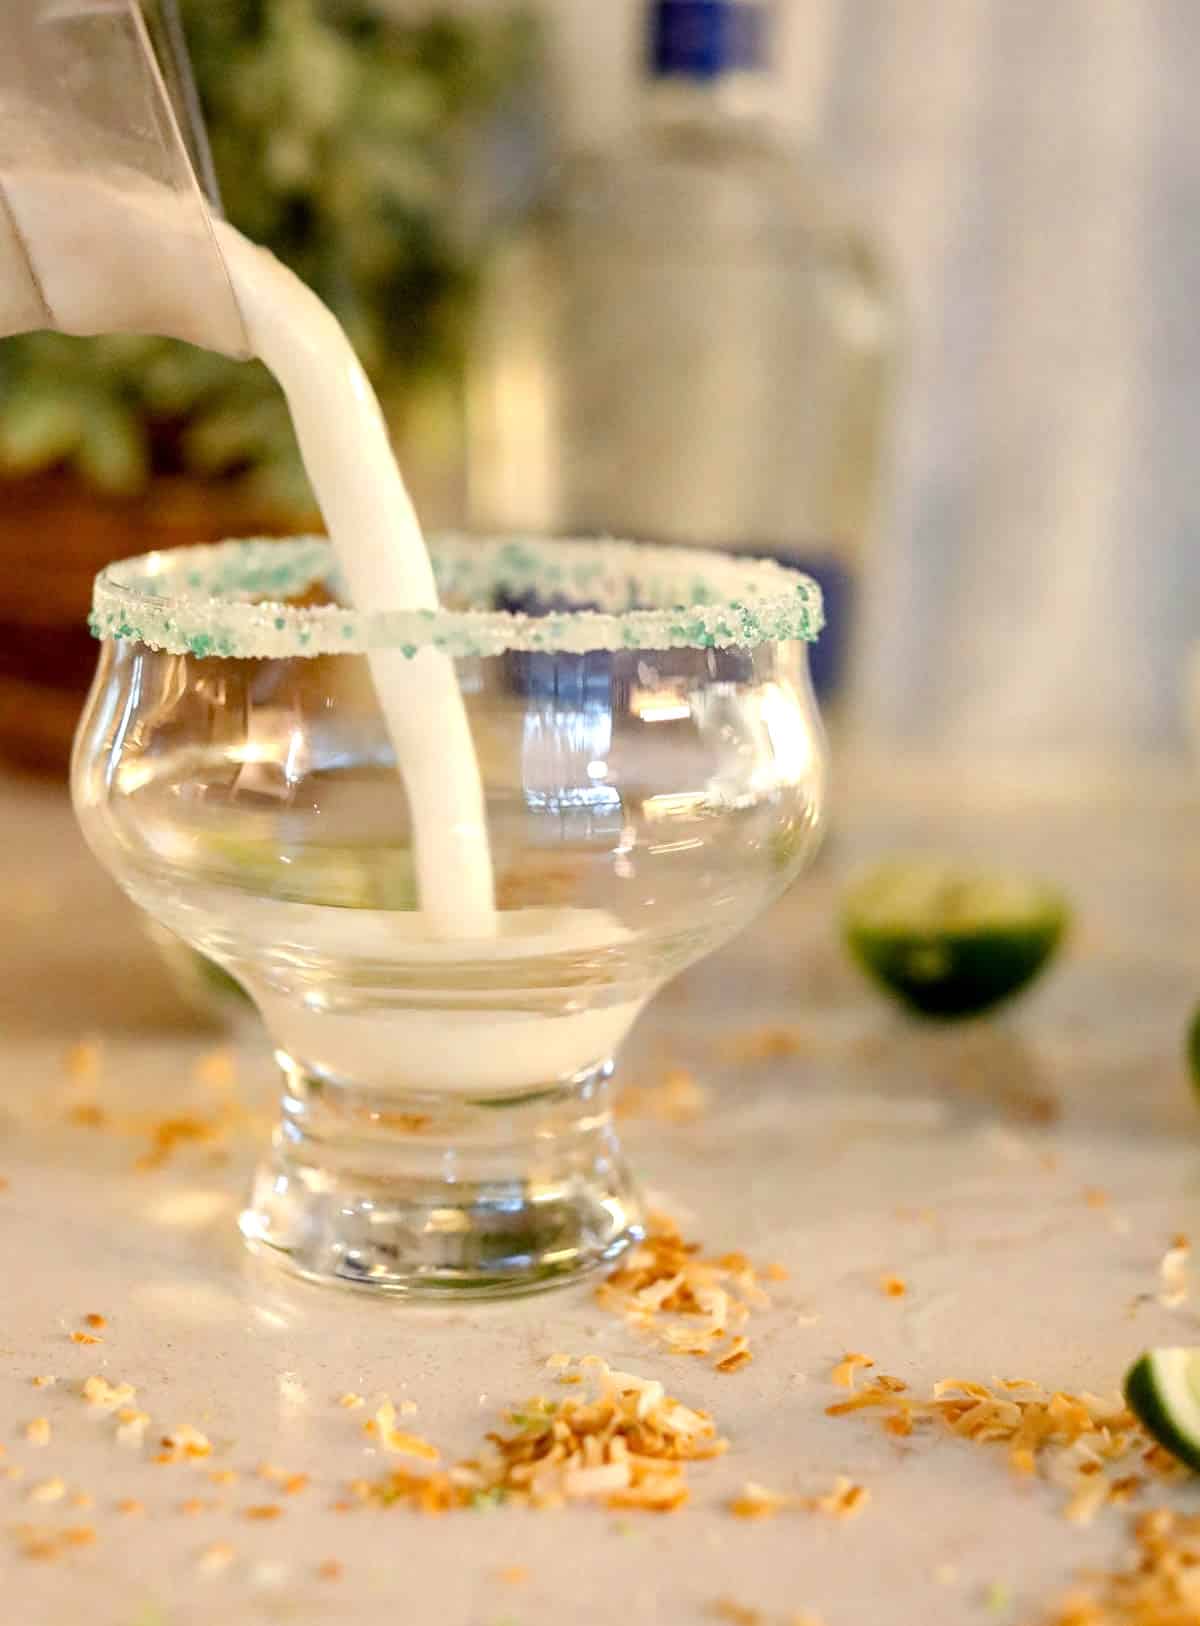 White frozen liquid being poured into a sugar rimmed glass on a beige counter.